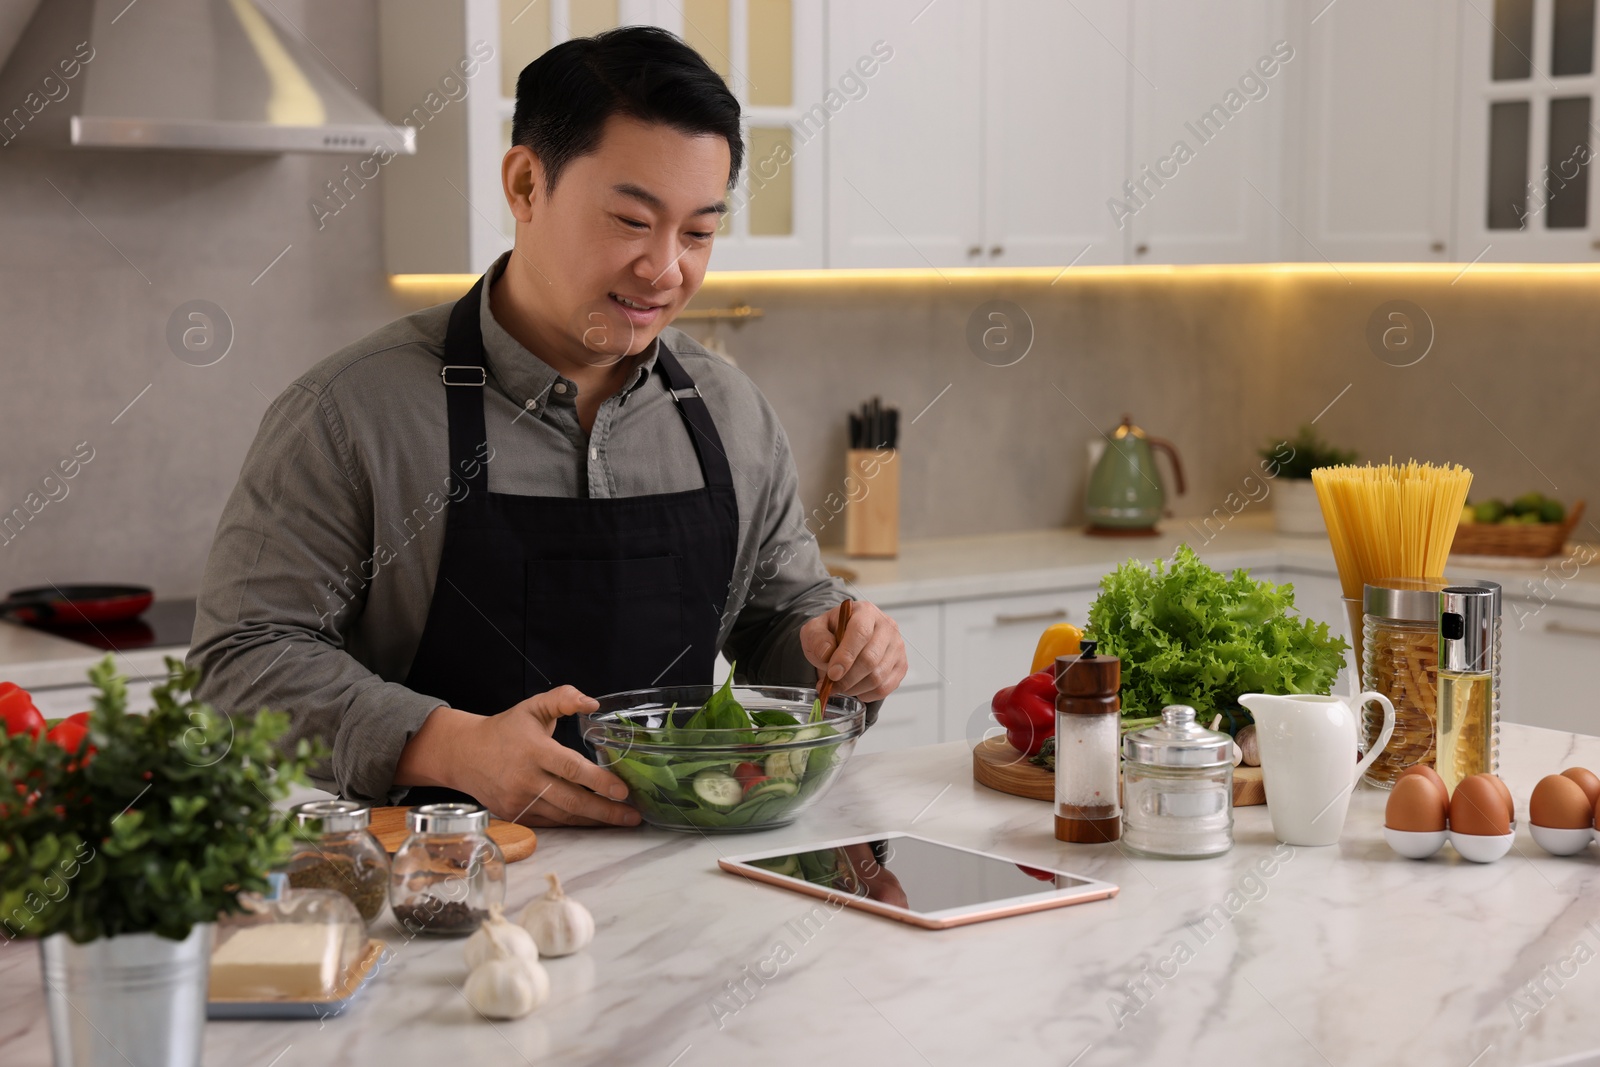 Photo of Man using tablet while cooking in kitchen